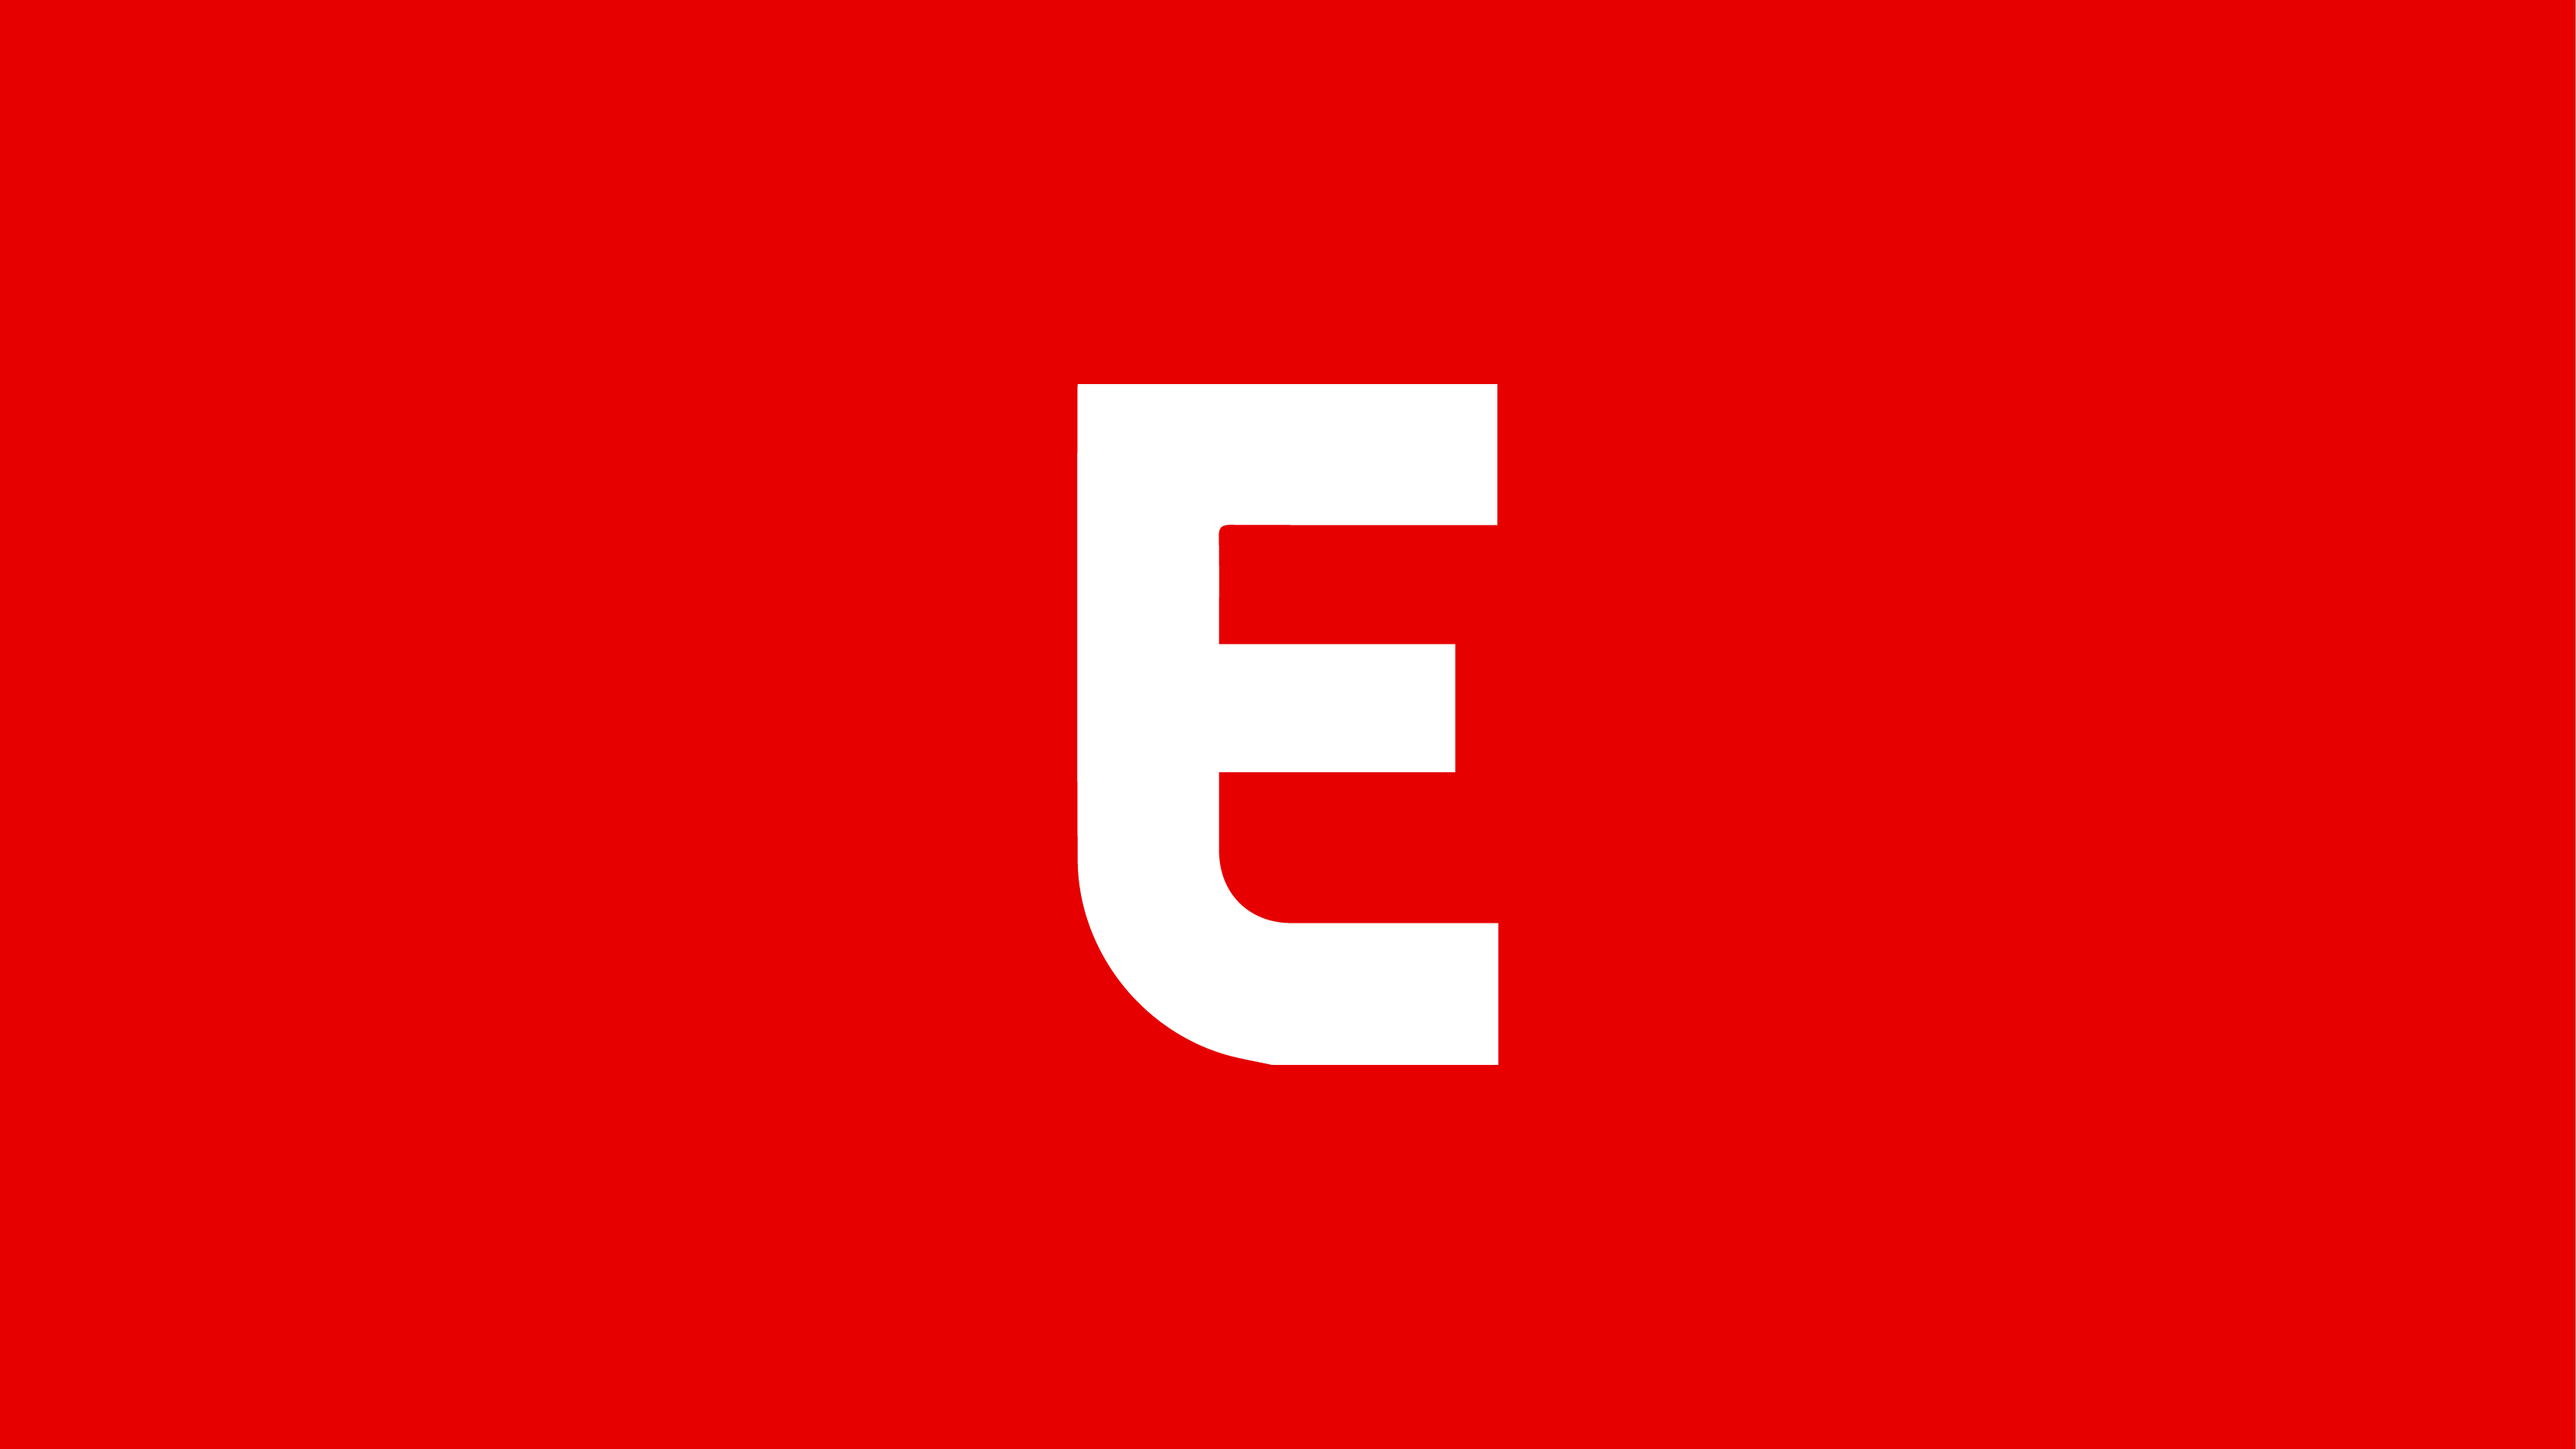 A solid red photo background with the Eater “E” logo superimposed in white.